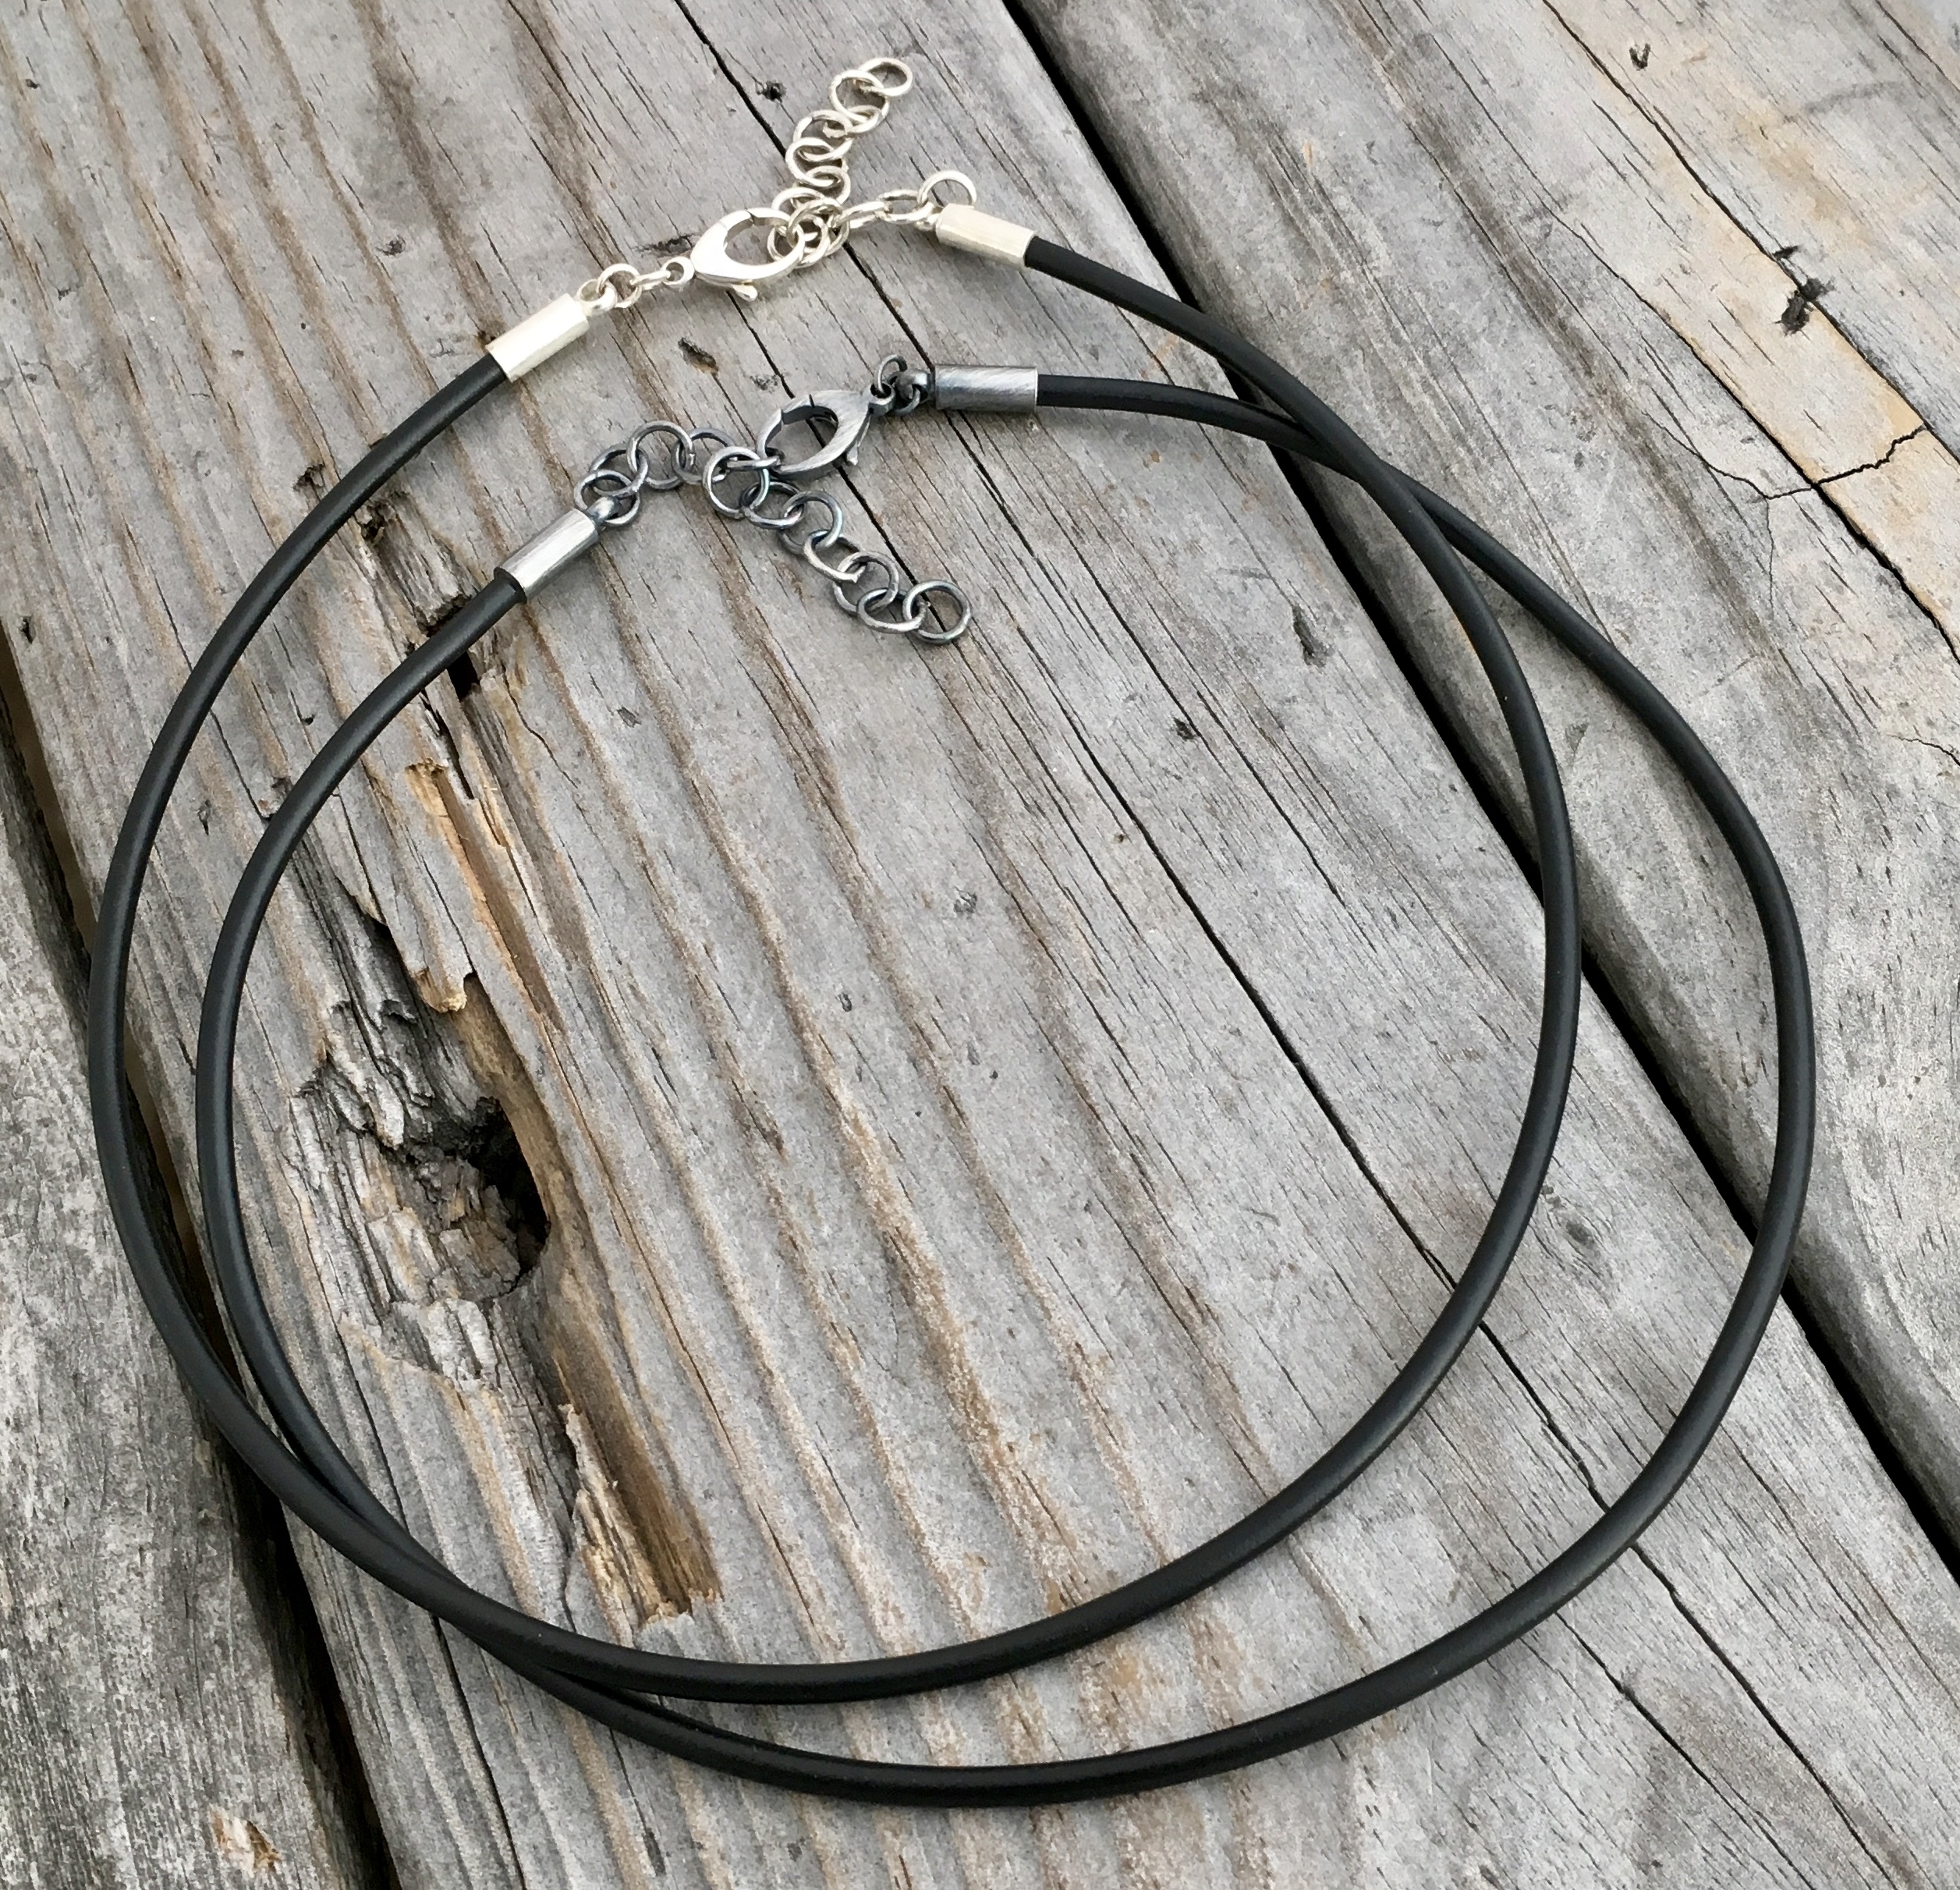 Sterling Silver 3mm Thick Black Leather Cord Necklace